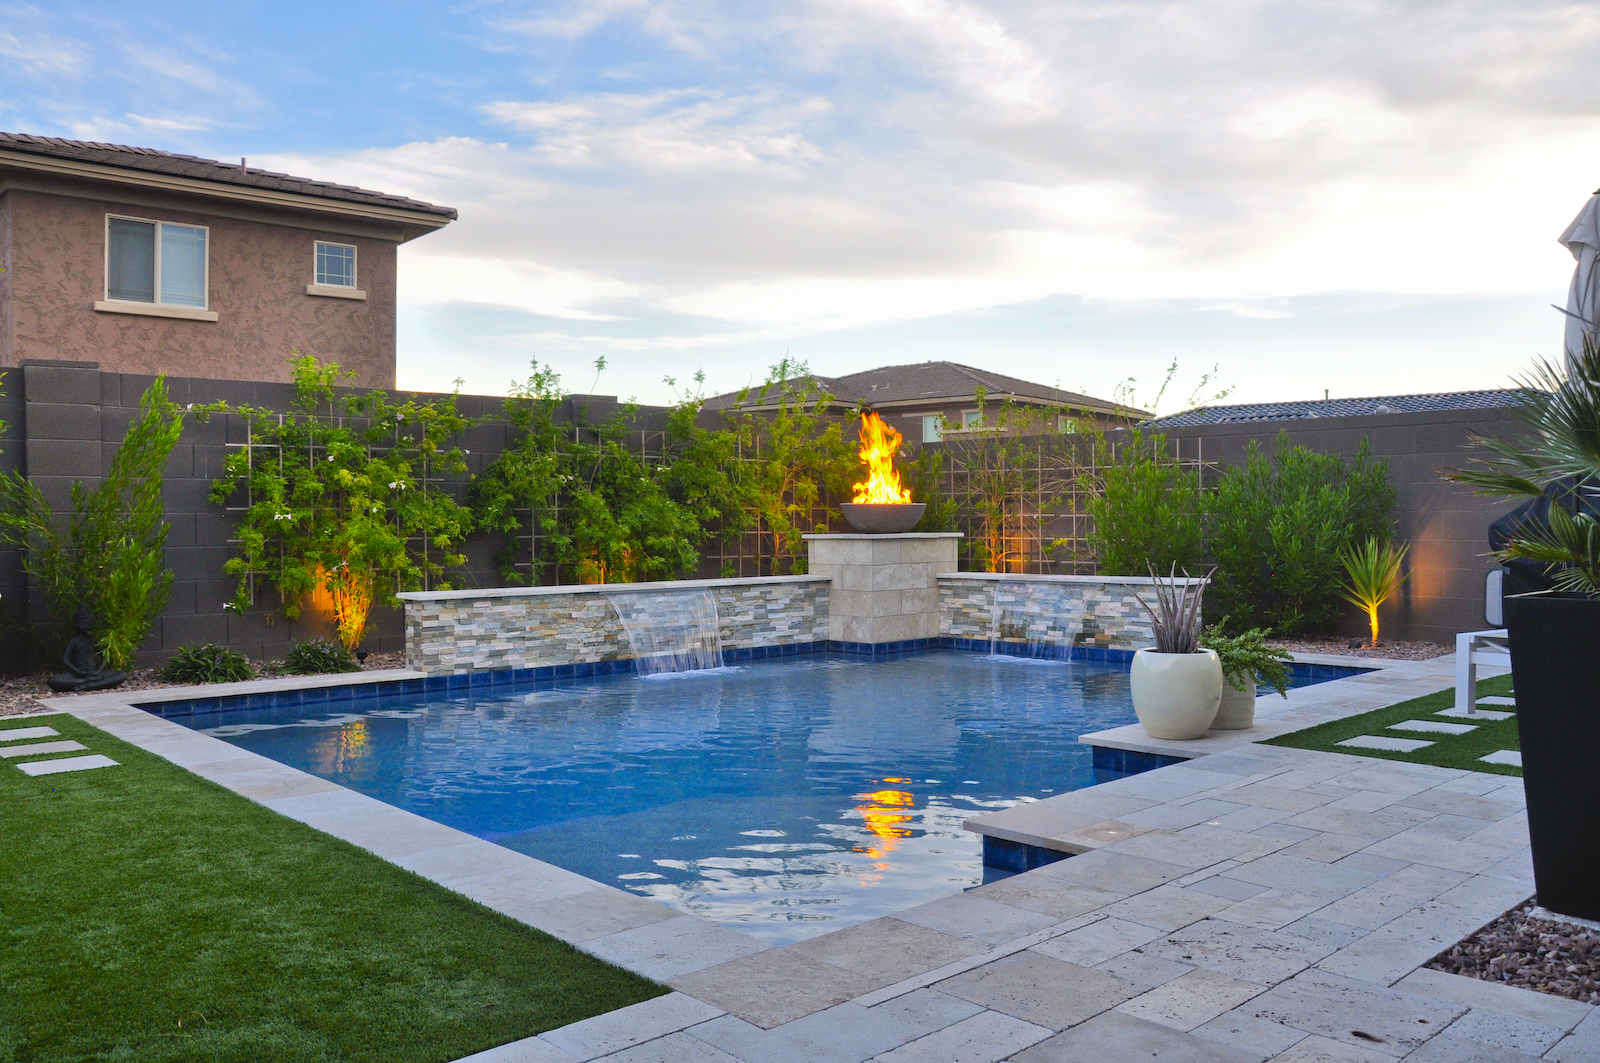 A swimming pool and an outdoor fireplace in a Zen-style garden